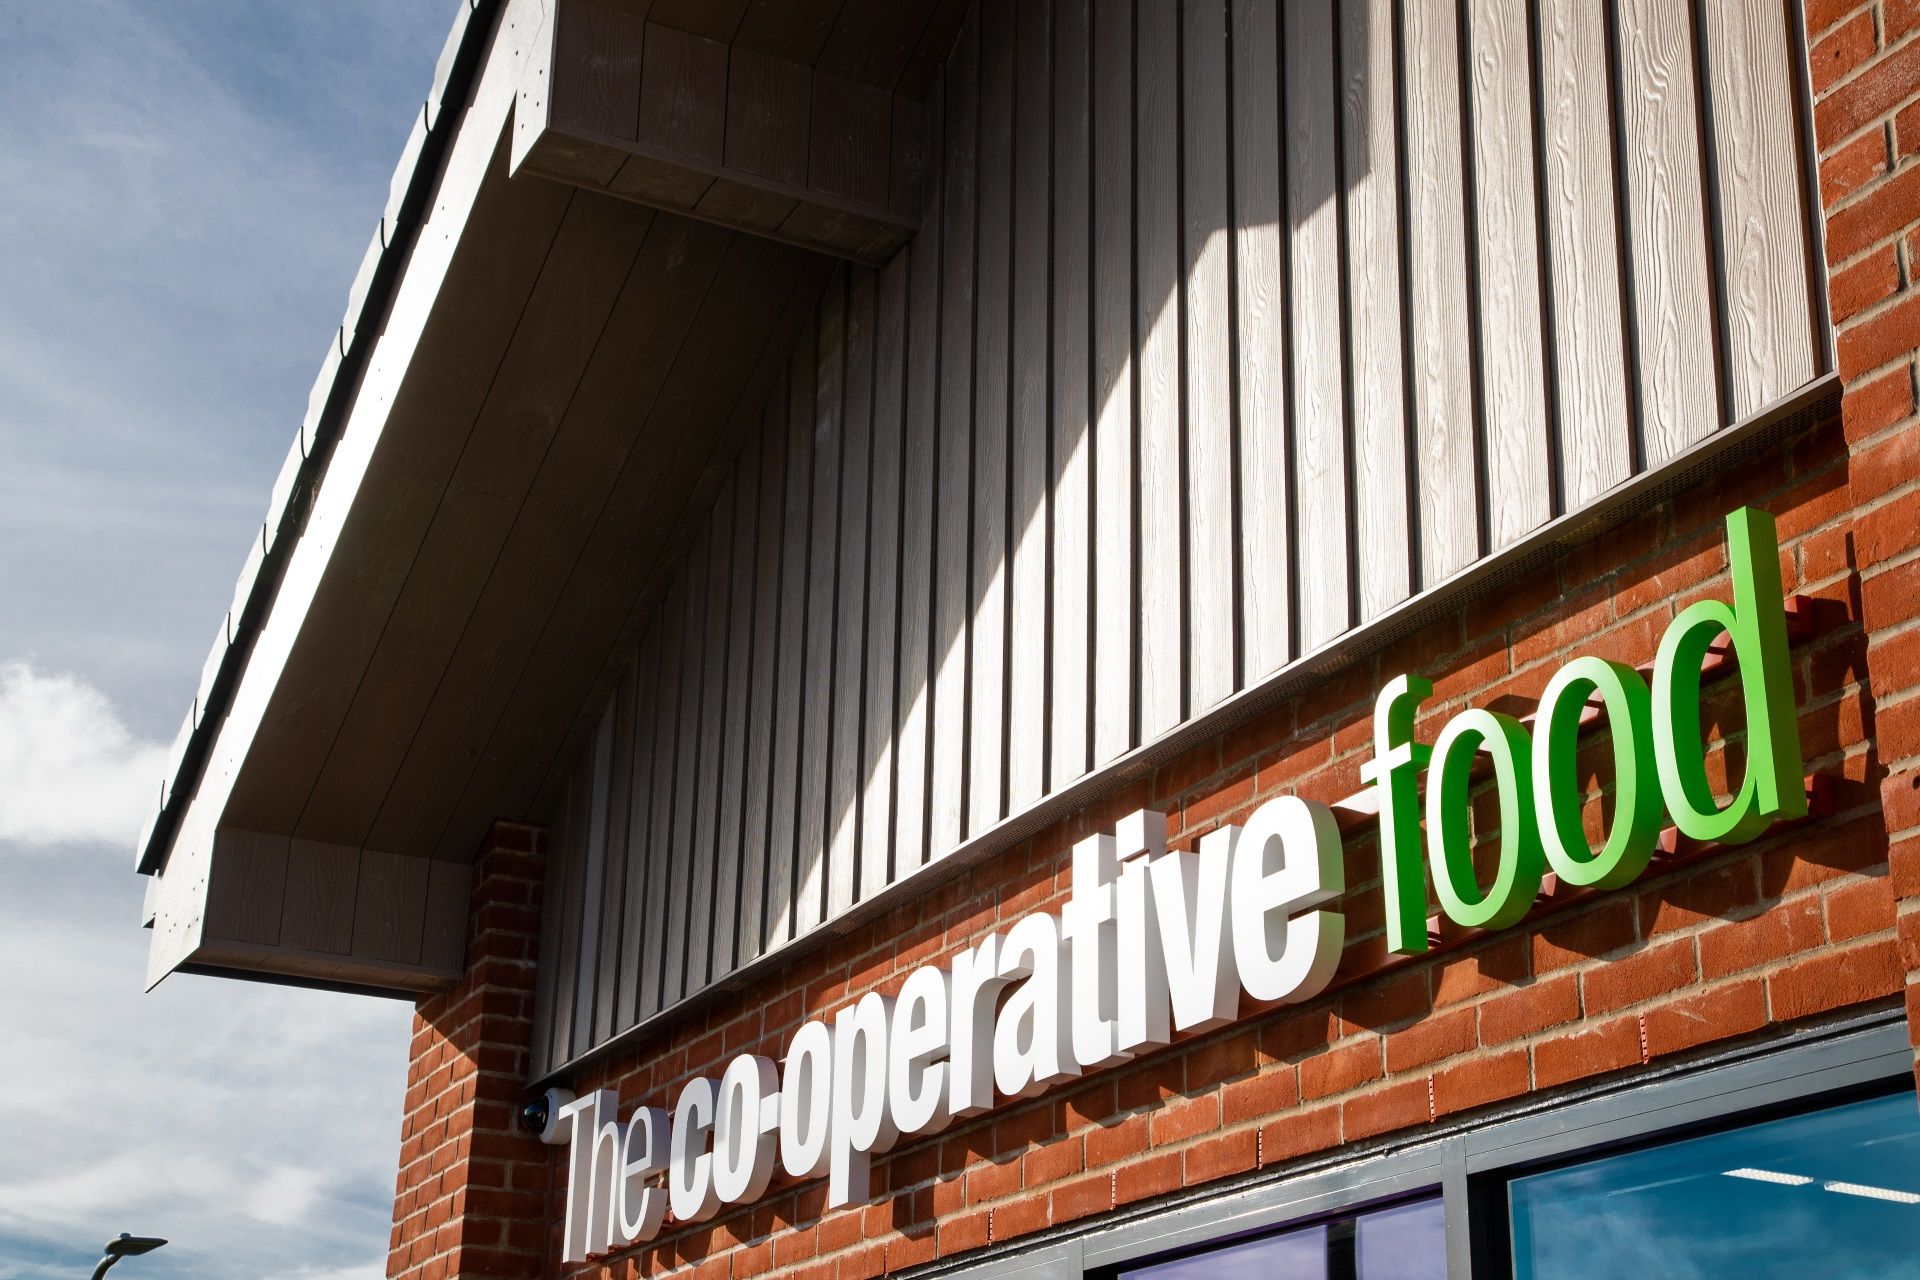 Central England Co-op set to open new community food store in Eastwood later this year